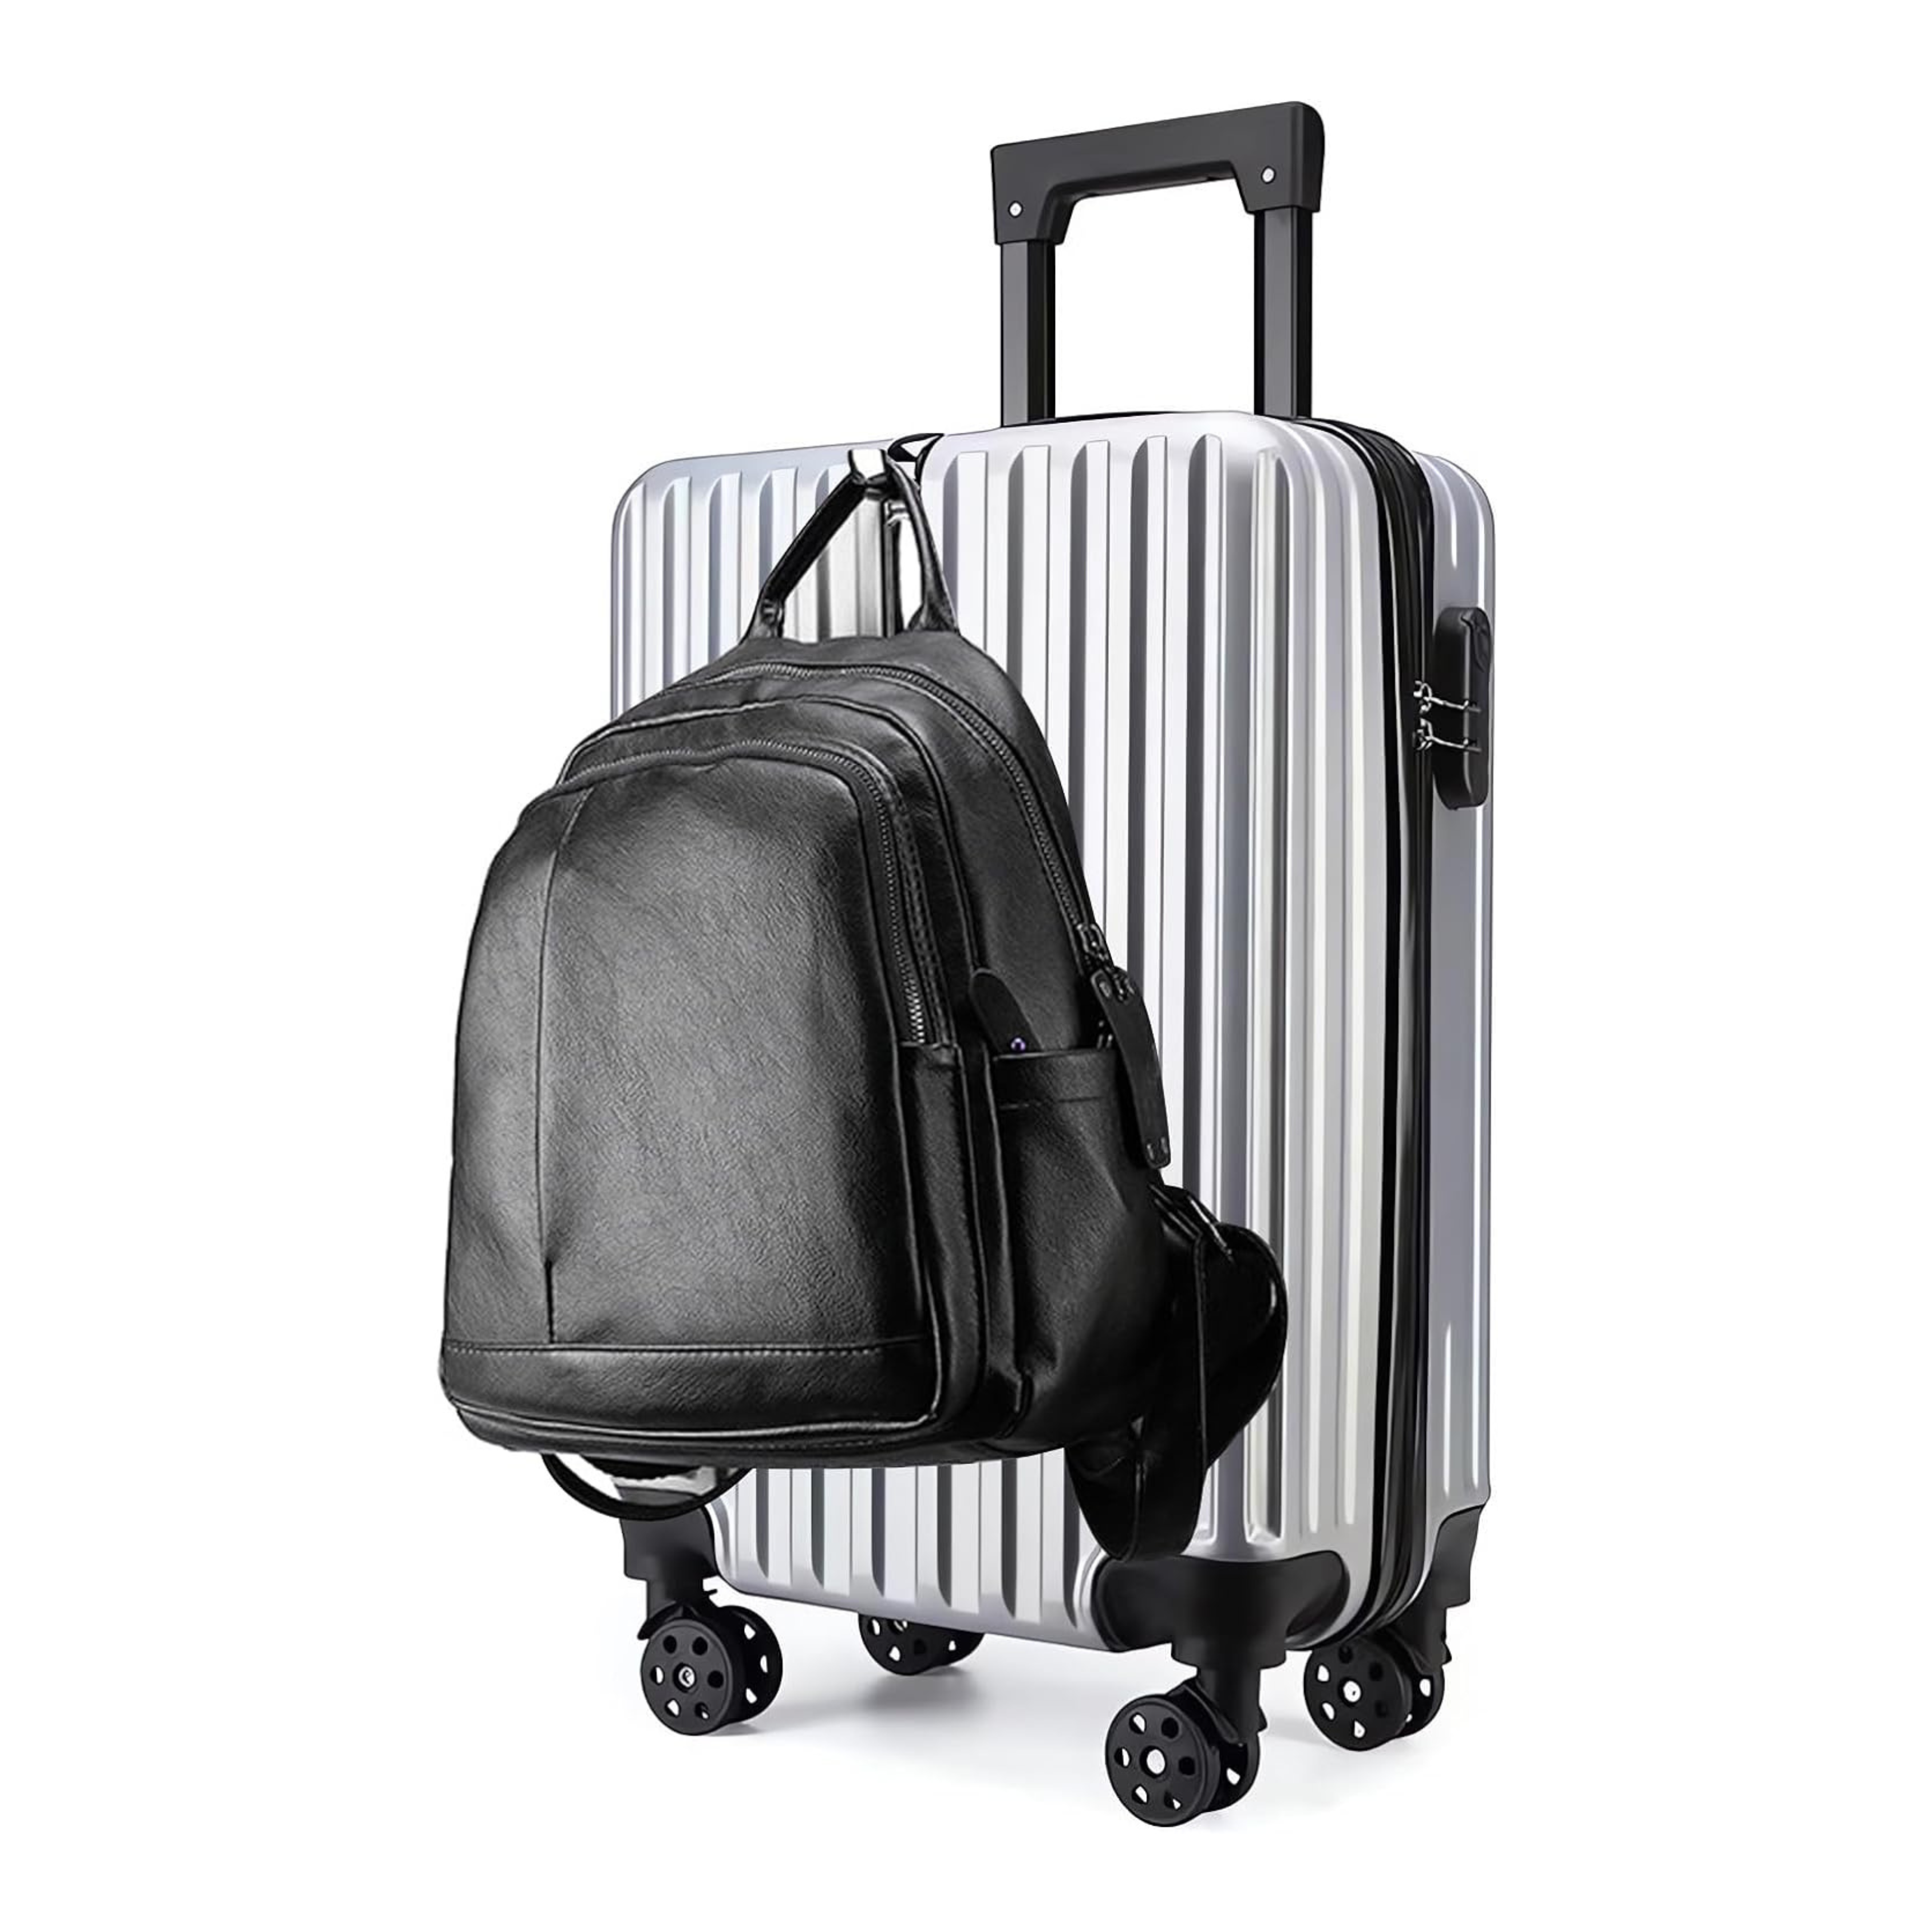 VINNYSEN Carry On Luggage 22x14x9 Airline Approved - 100% Polycarbonate Expandable Hard Shell Suitcase with Spinner Wheels (Silver)